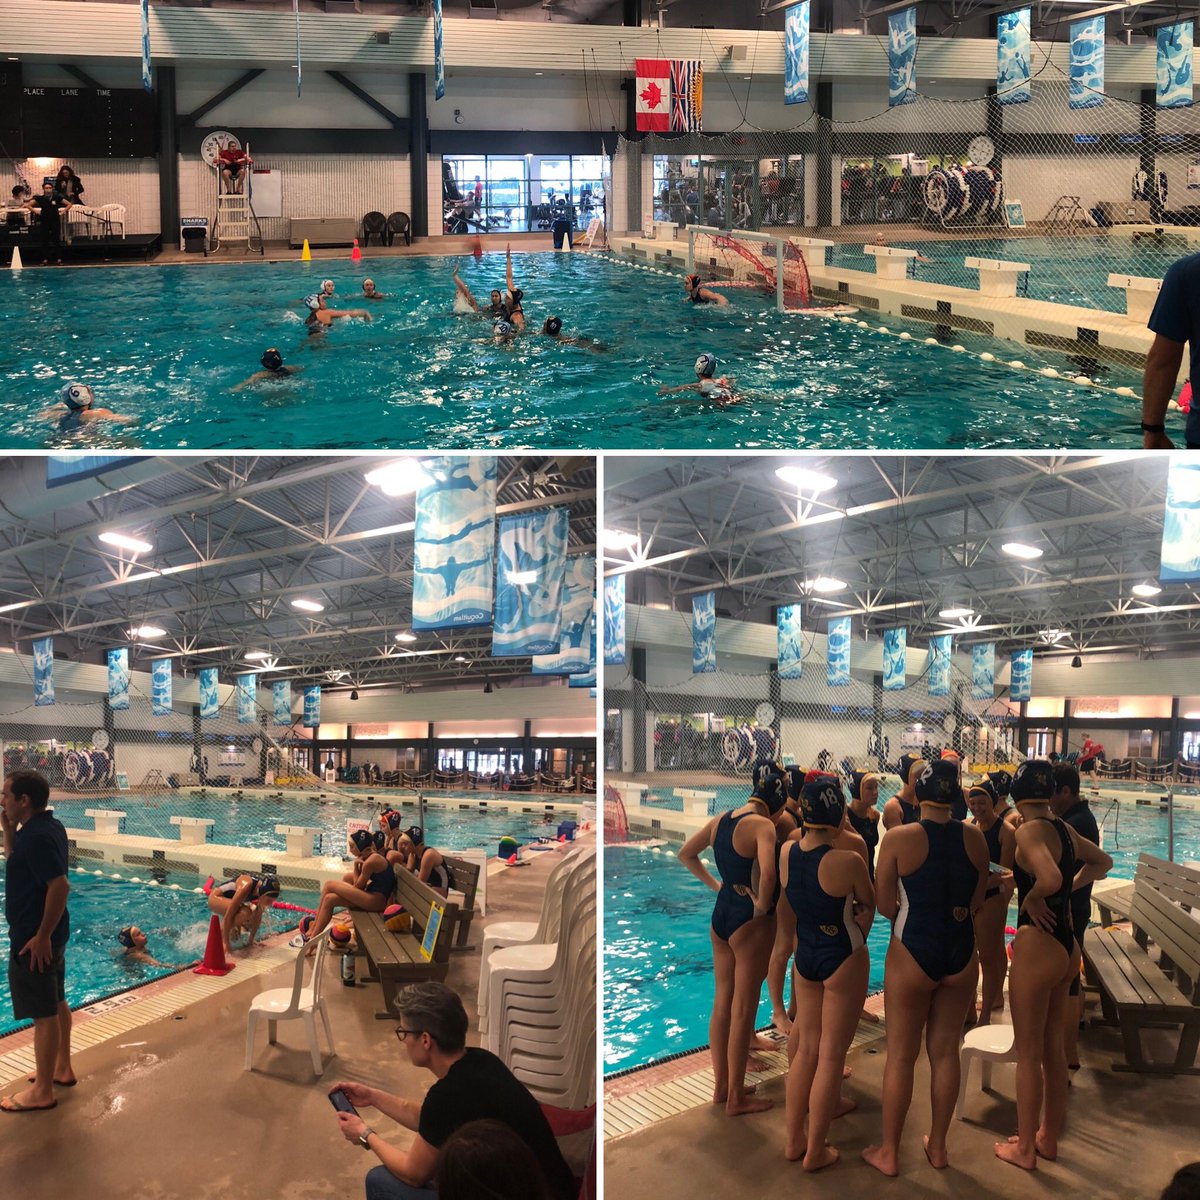 #Montereybayunitedclub out and about at CCAG #California #usawp #swim #waterpolocanada#16u/19u girls 🇨🇦🤽🏼‍♀️🇺🇸 #pacificstorm #fvwp